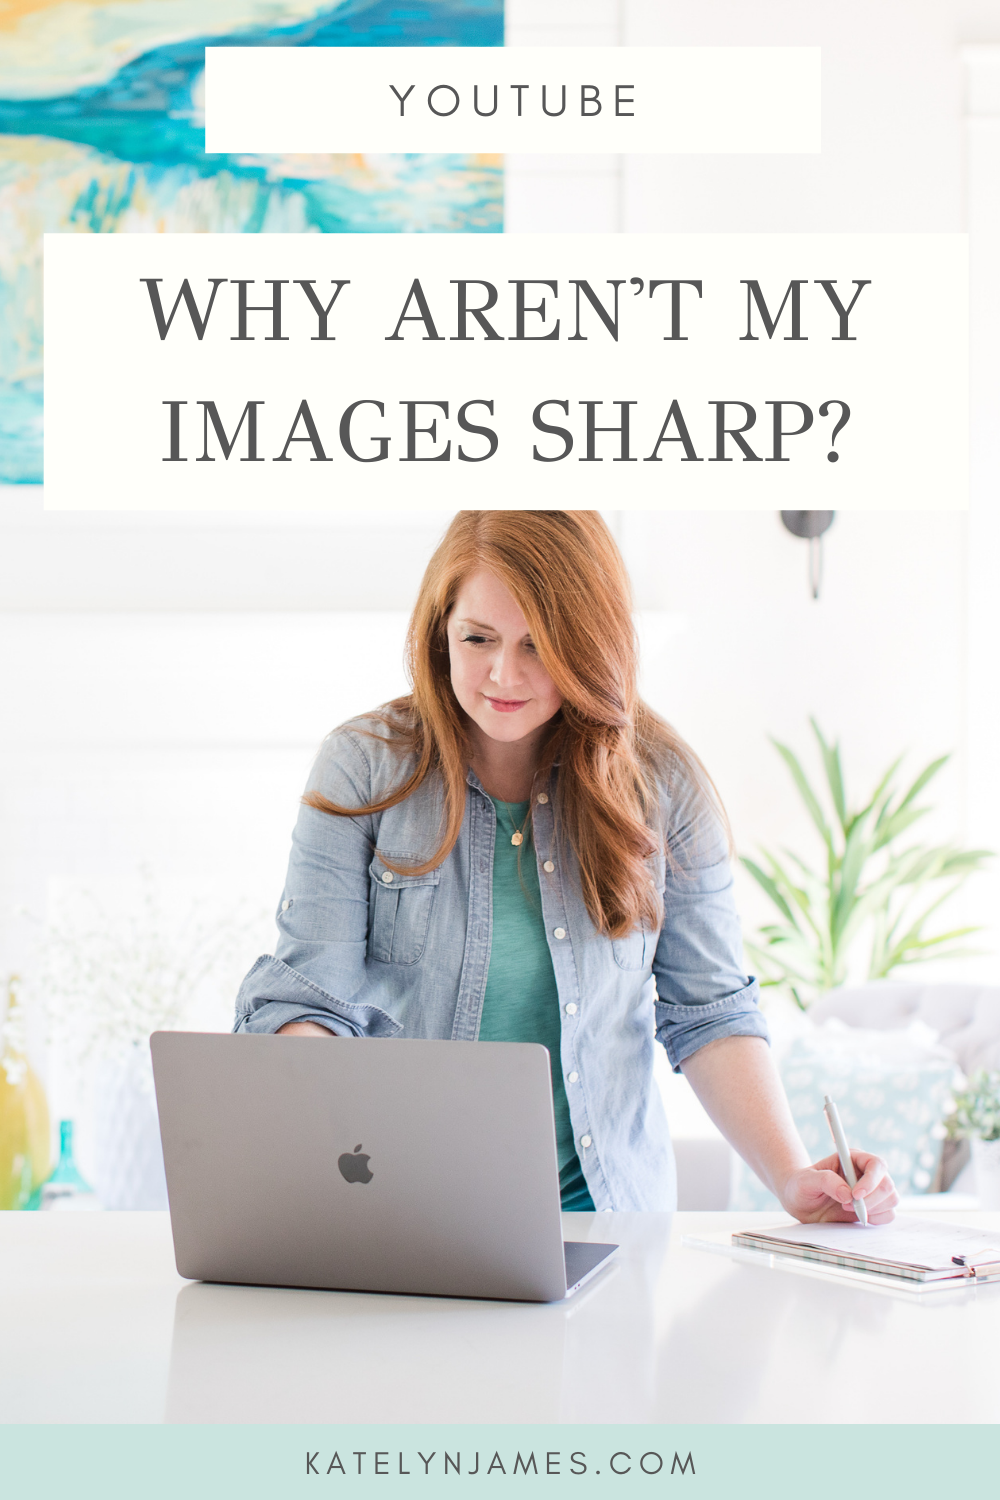 Why Aren't My Images Sharp?